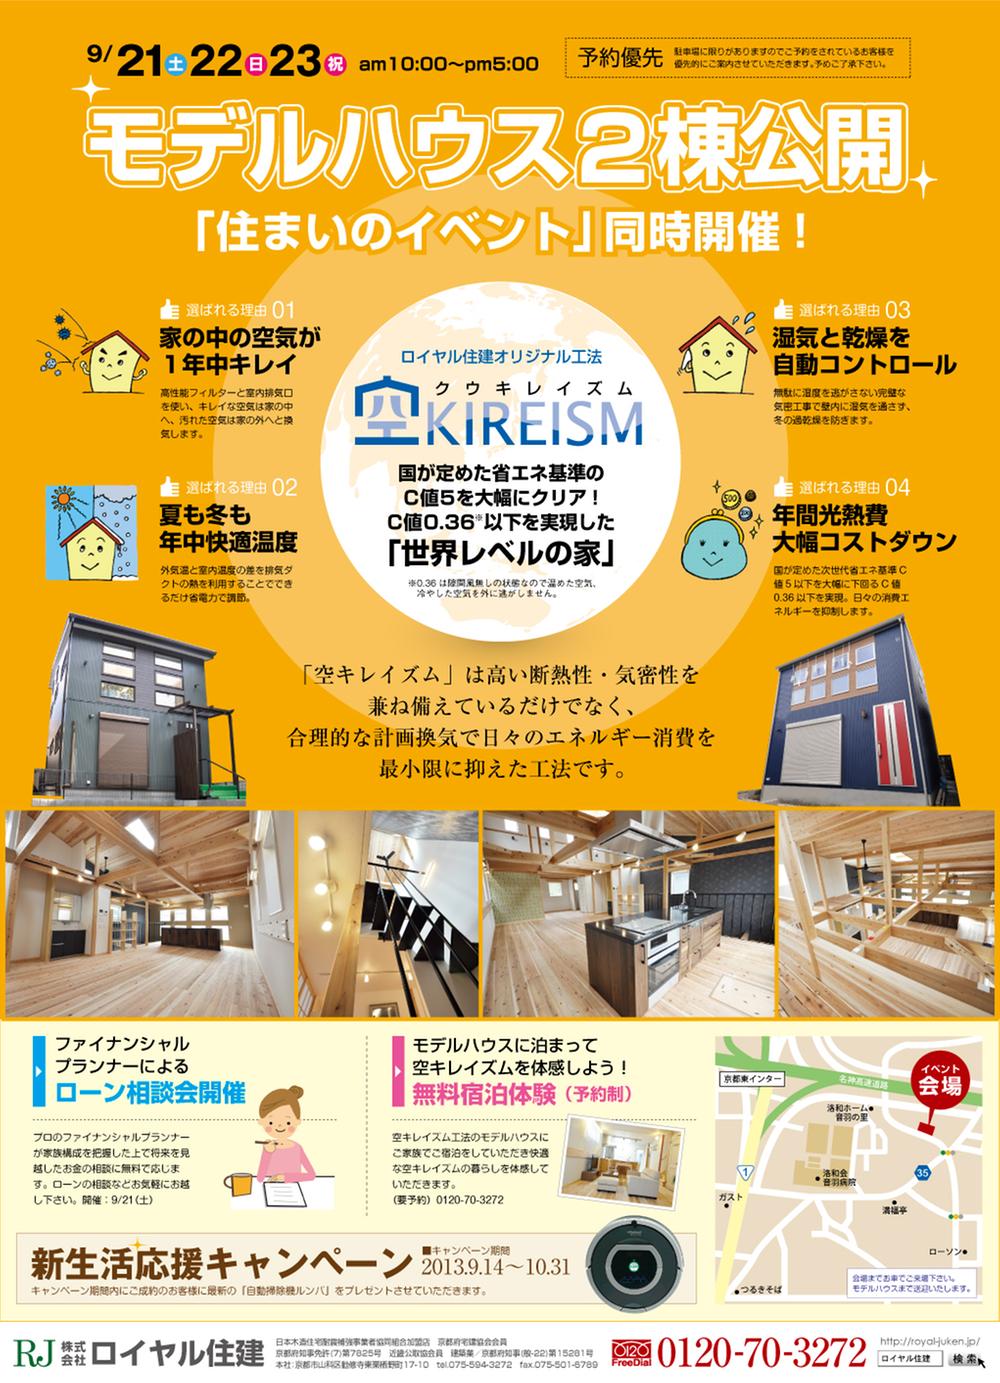 Other. soil, Day, Congratulation We look forward in the field. We have empty Kireizumu "accommodation experience" held. For more information, Please inquire.